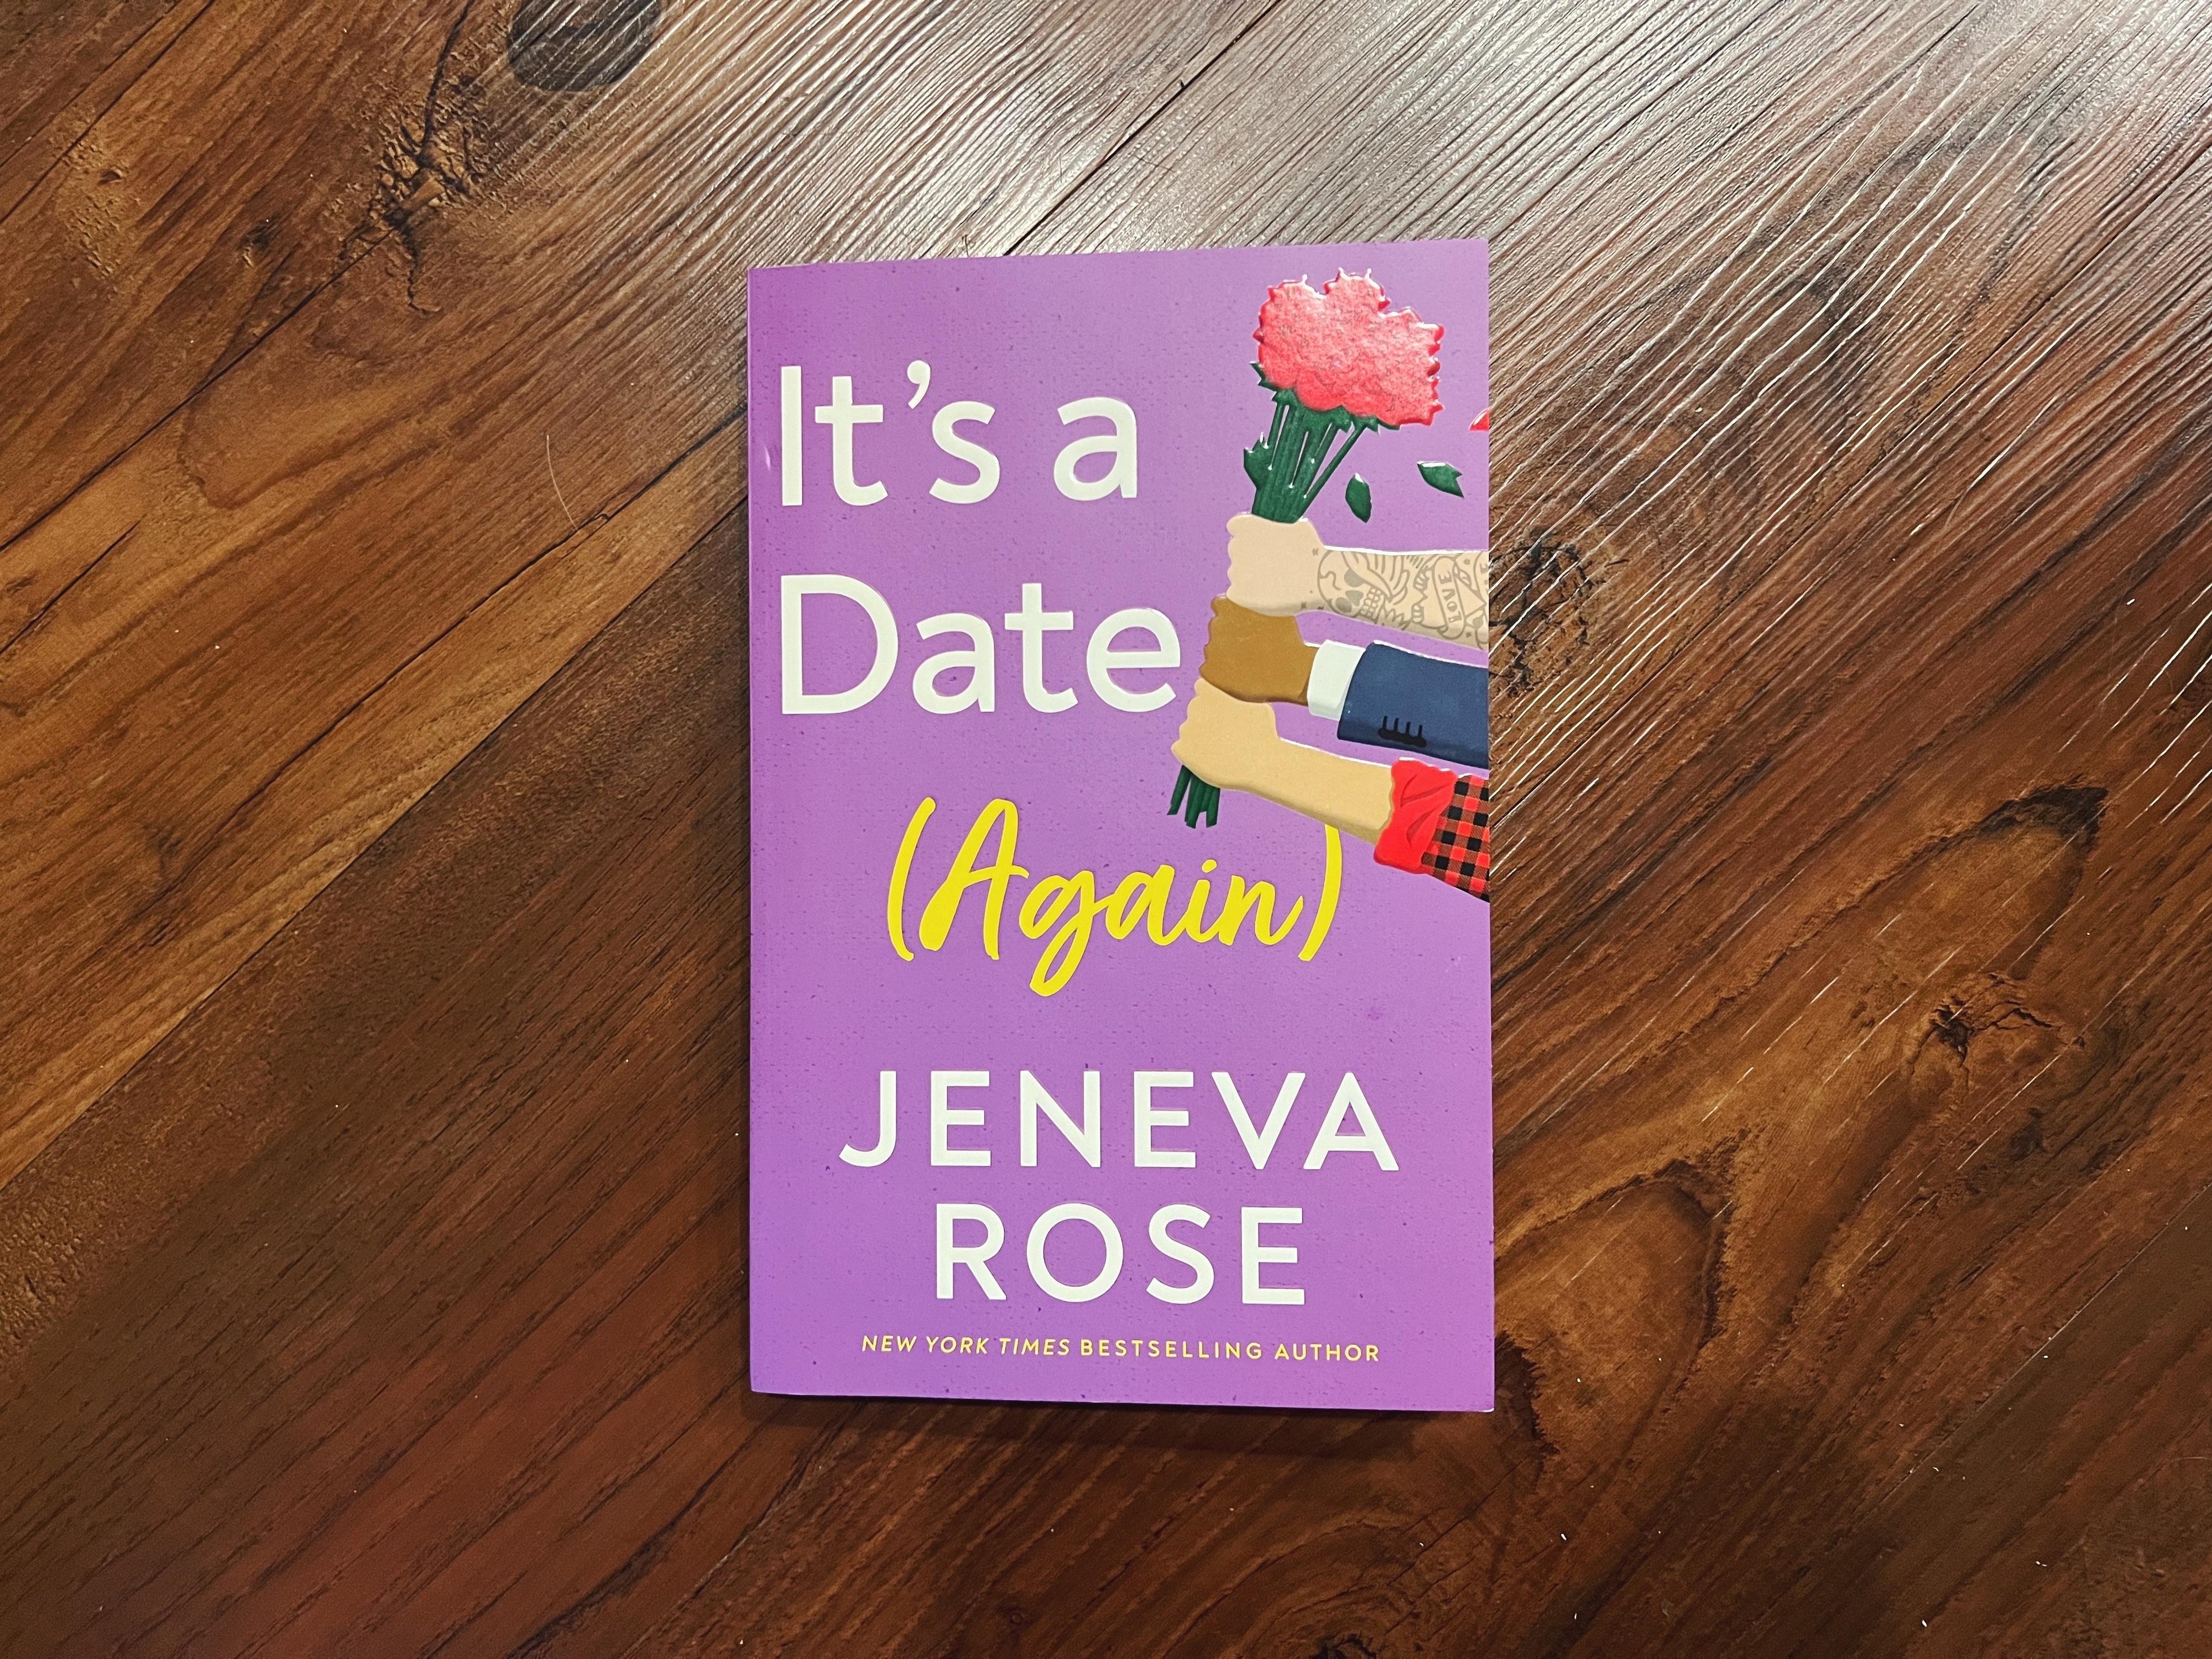 A book titled &quot;It&#x27;s a Date (Again)&quot; by Geneva Rose lays on a wooden surface